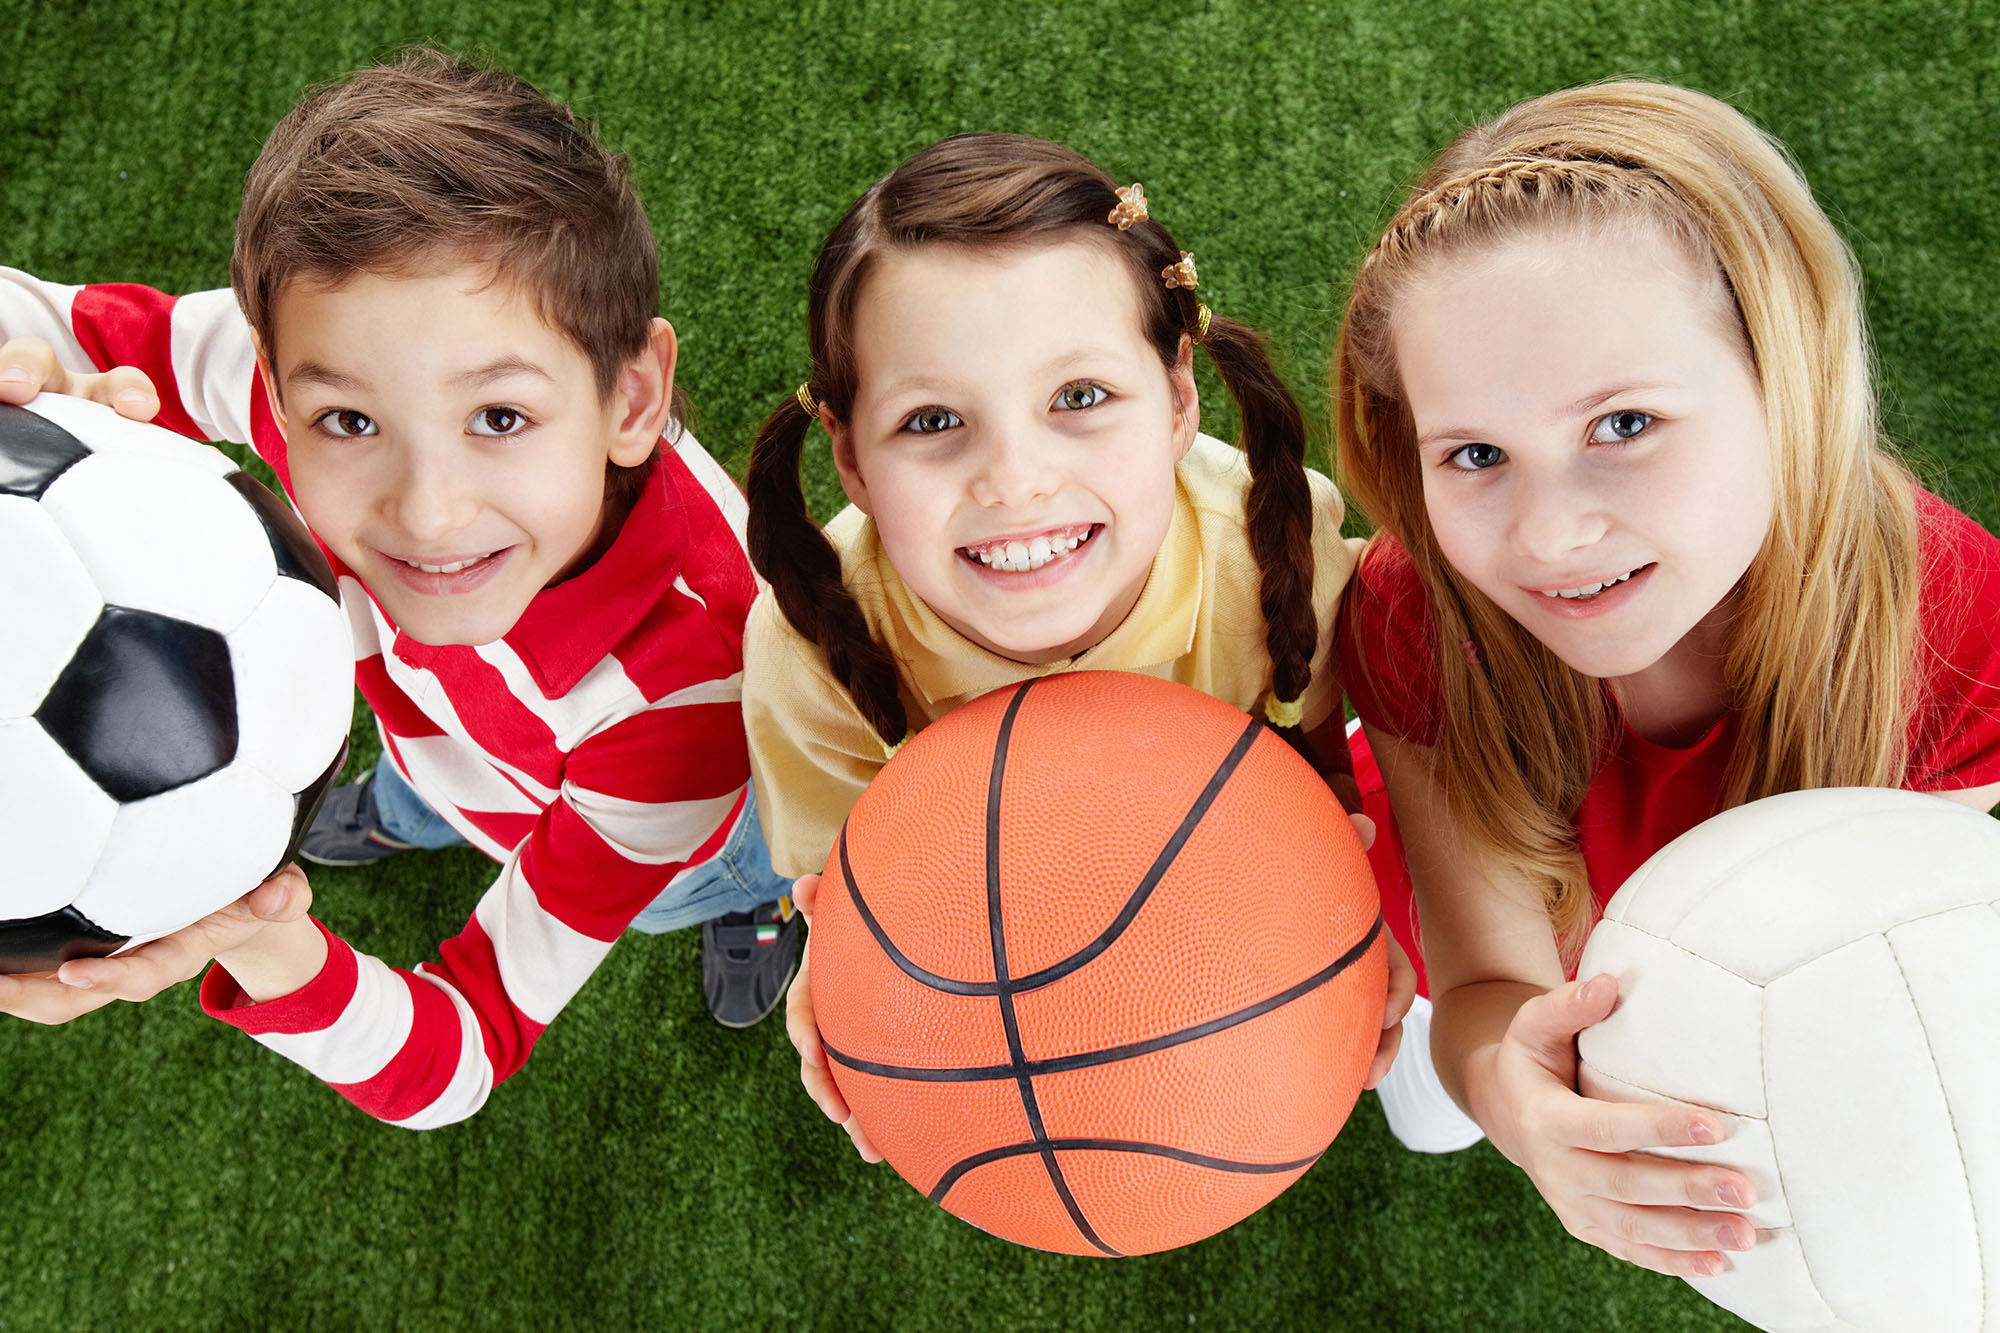 Children and Sports | When Is Too Young To Start?